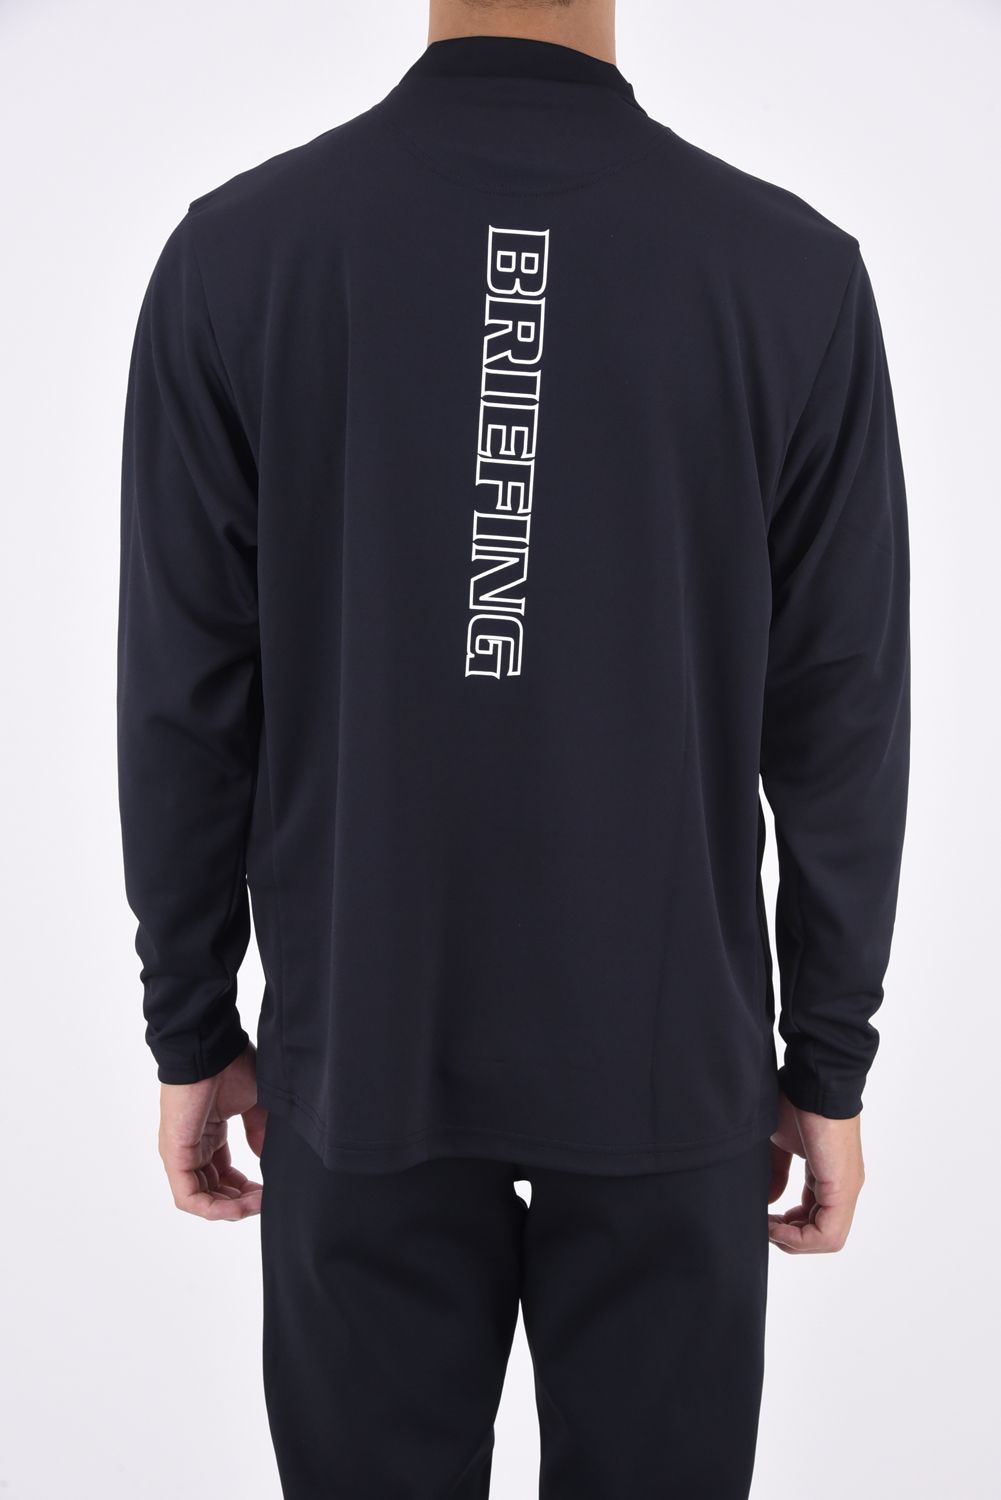 BRIEFING - MENS B TOUR LS MOCK NECK RELAXED FIT